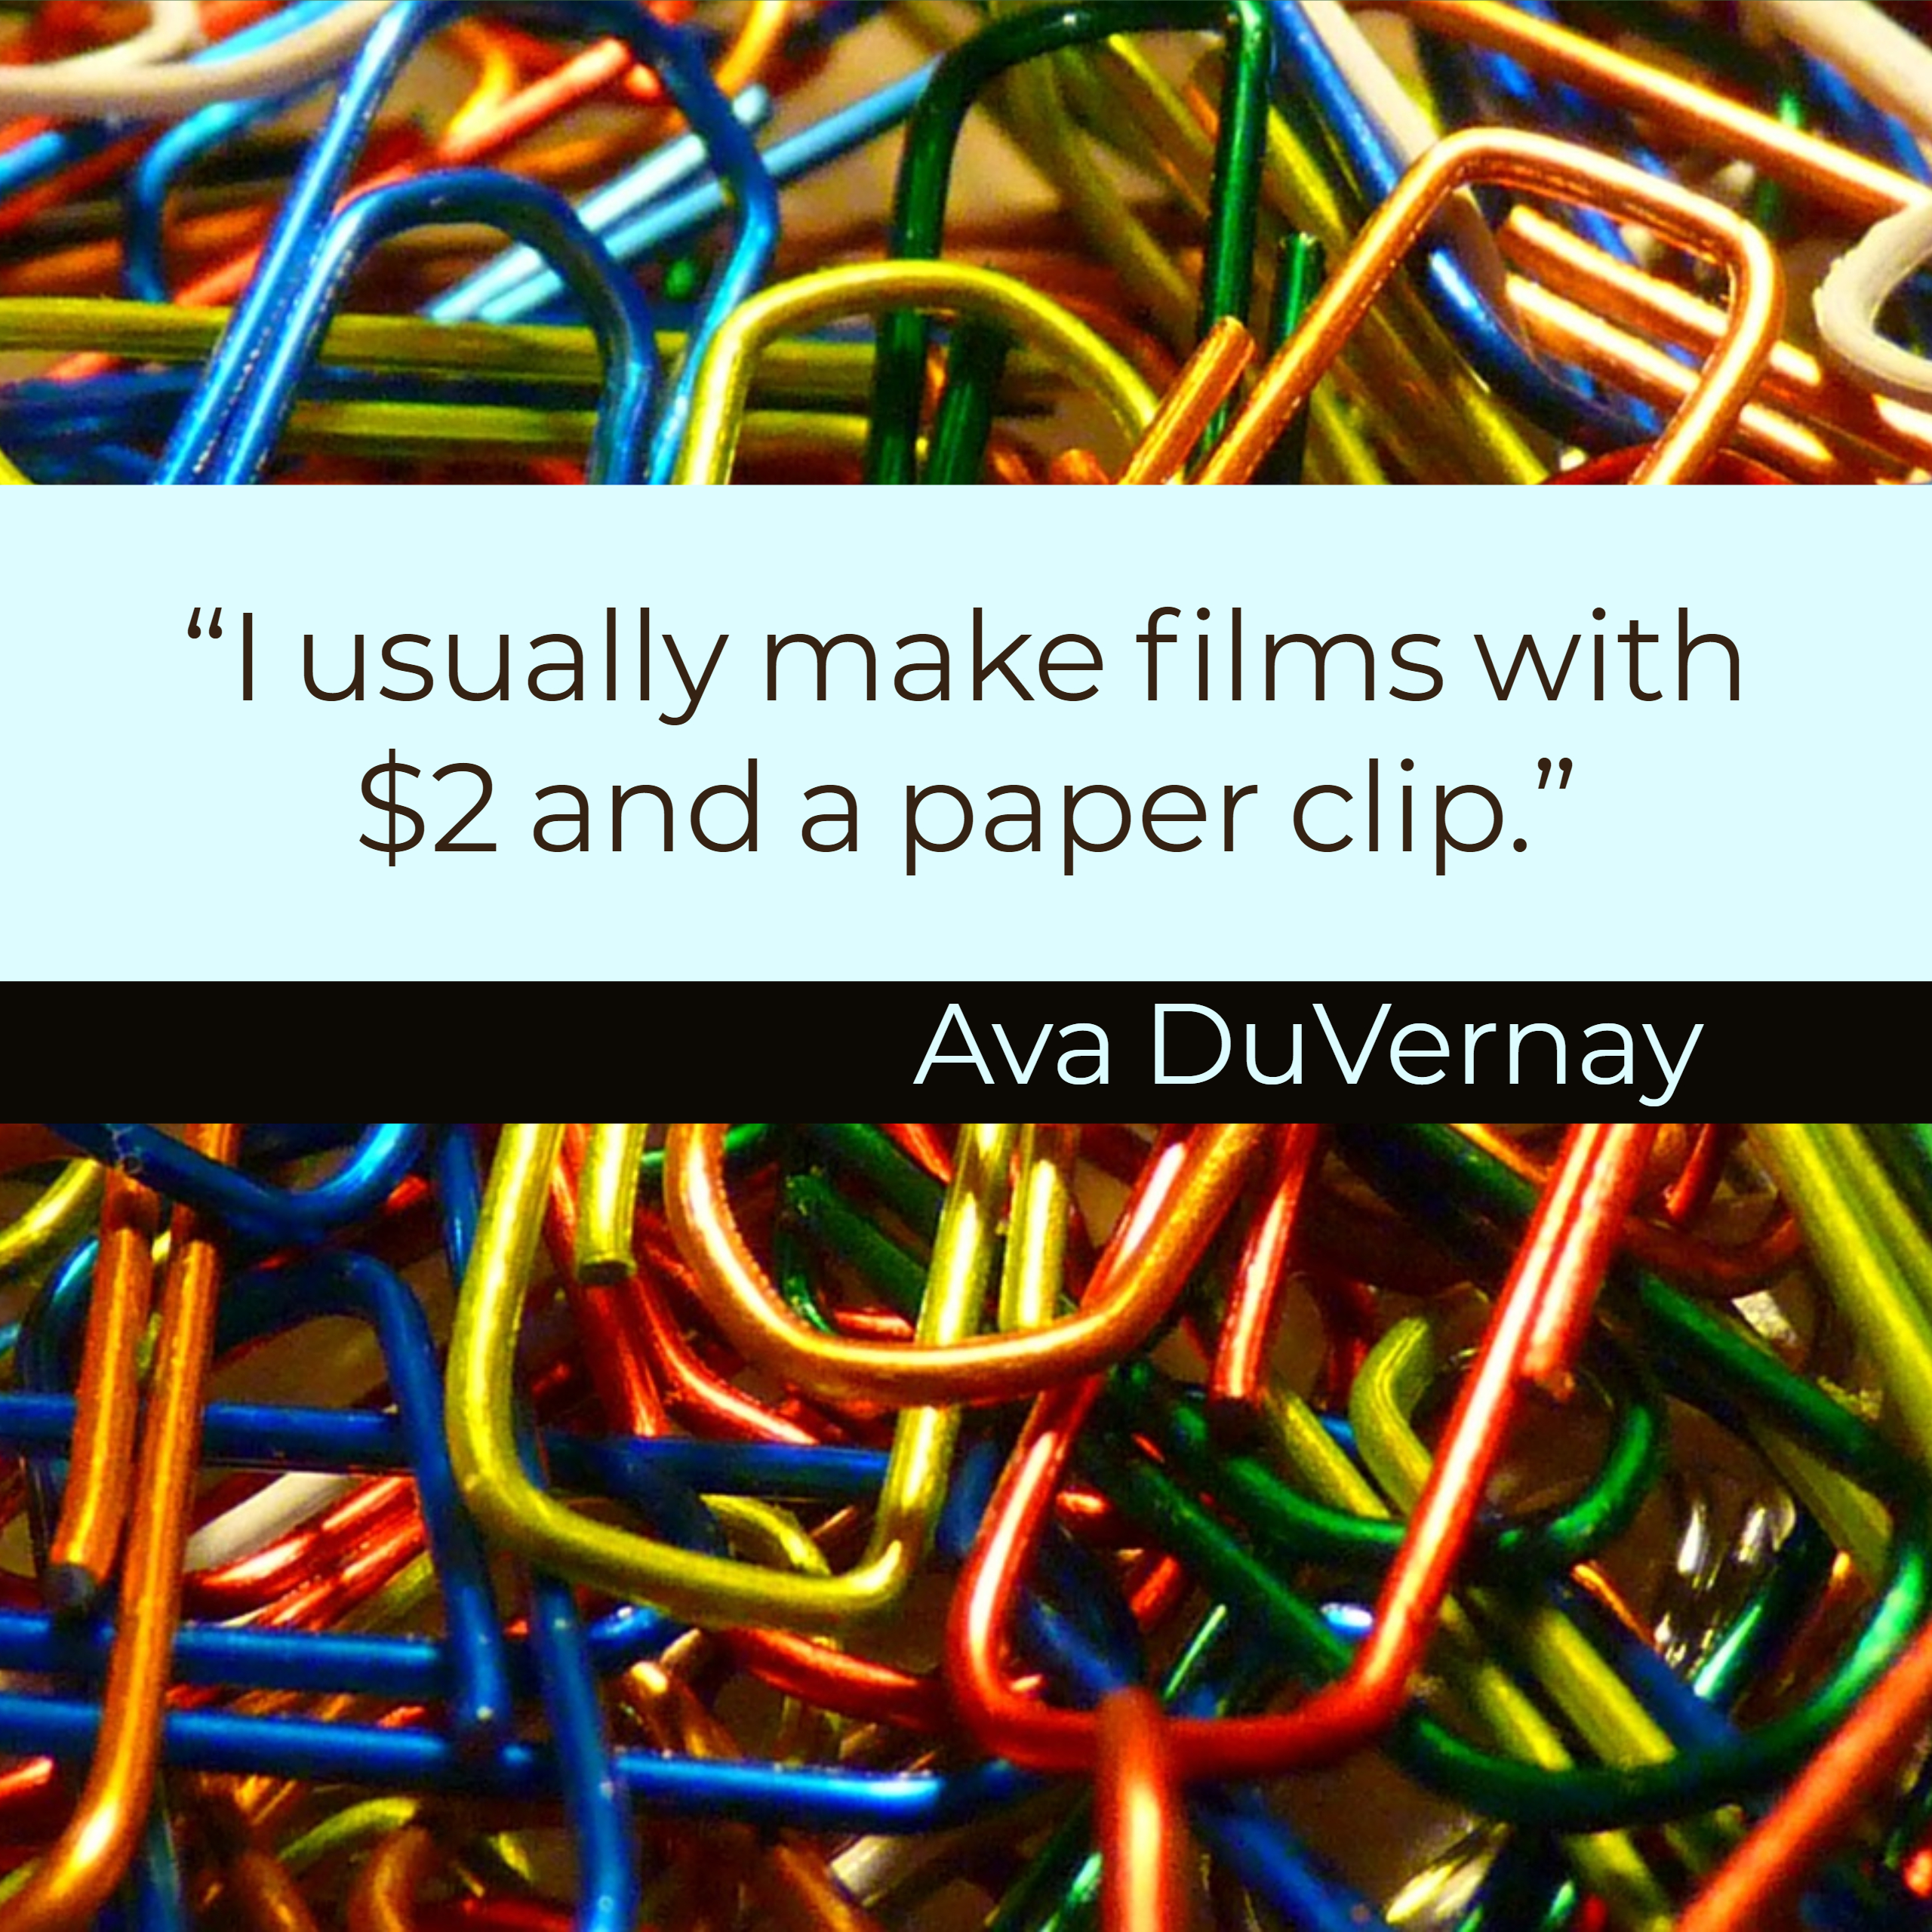 I usually make films with $2 and a paper clip.